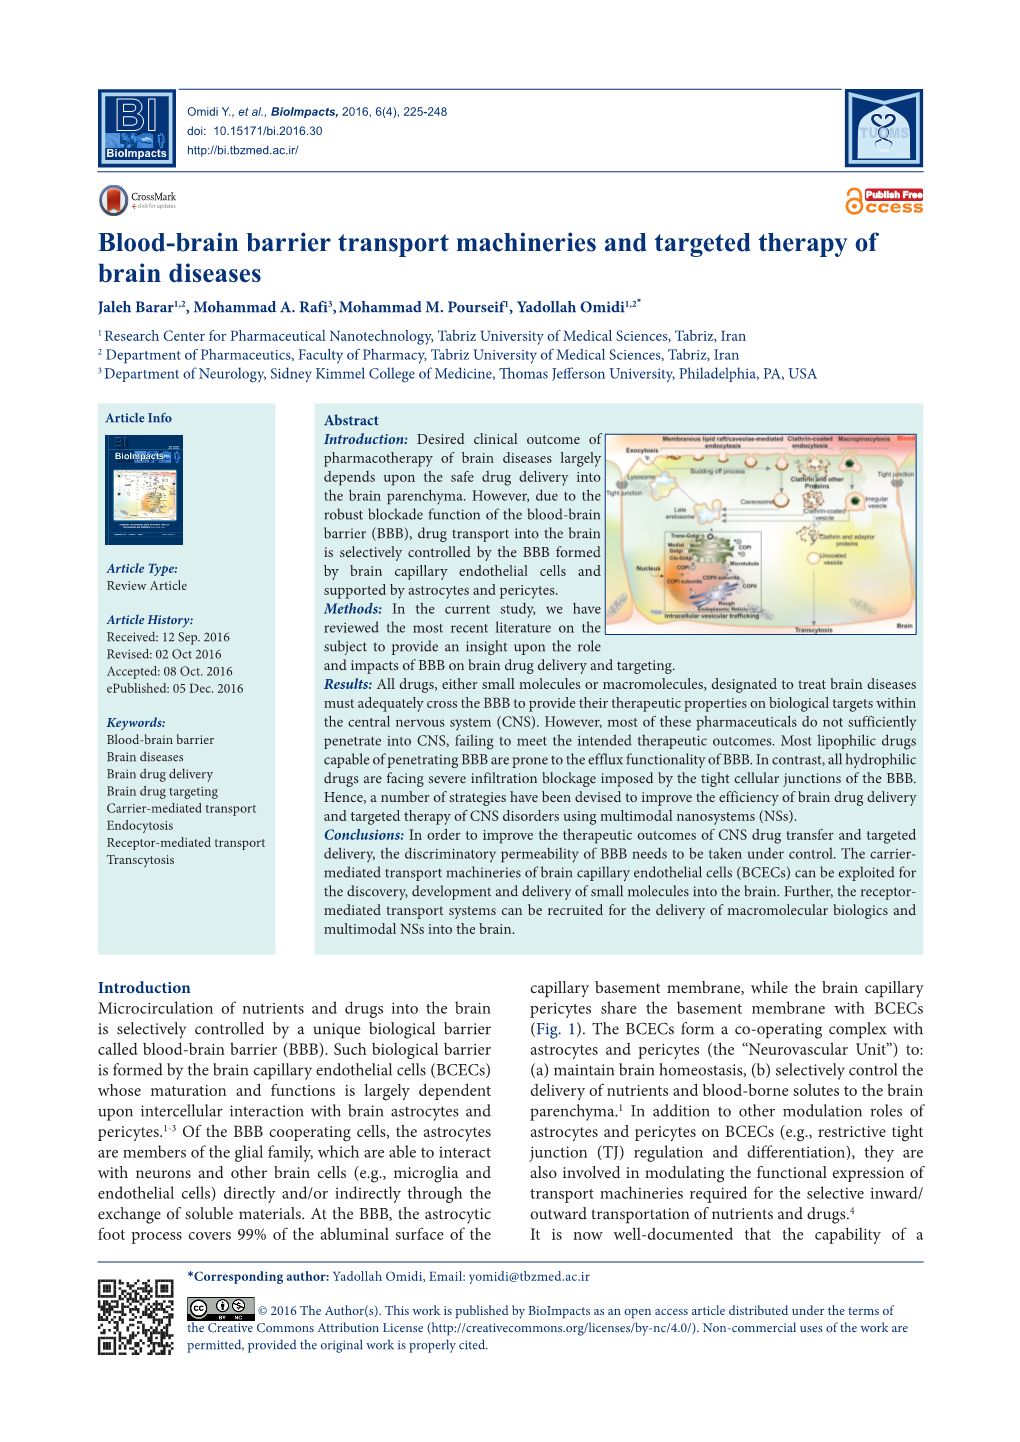 Blood-Brain Barrier Transport Machineries and Targeted Therapy of Brain Diseases Jaleh Barar1,2, Mohammad A